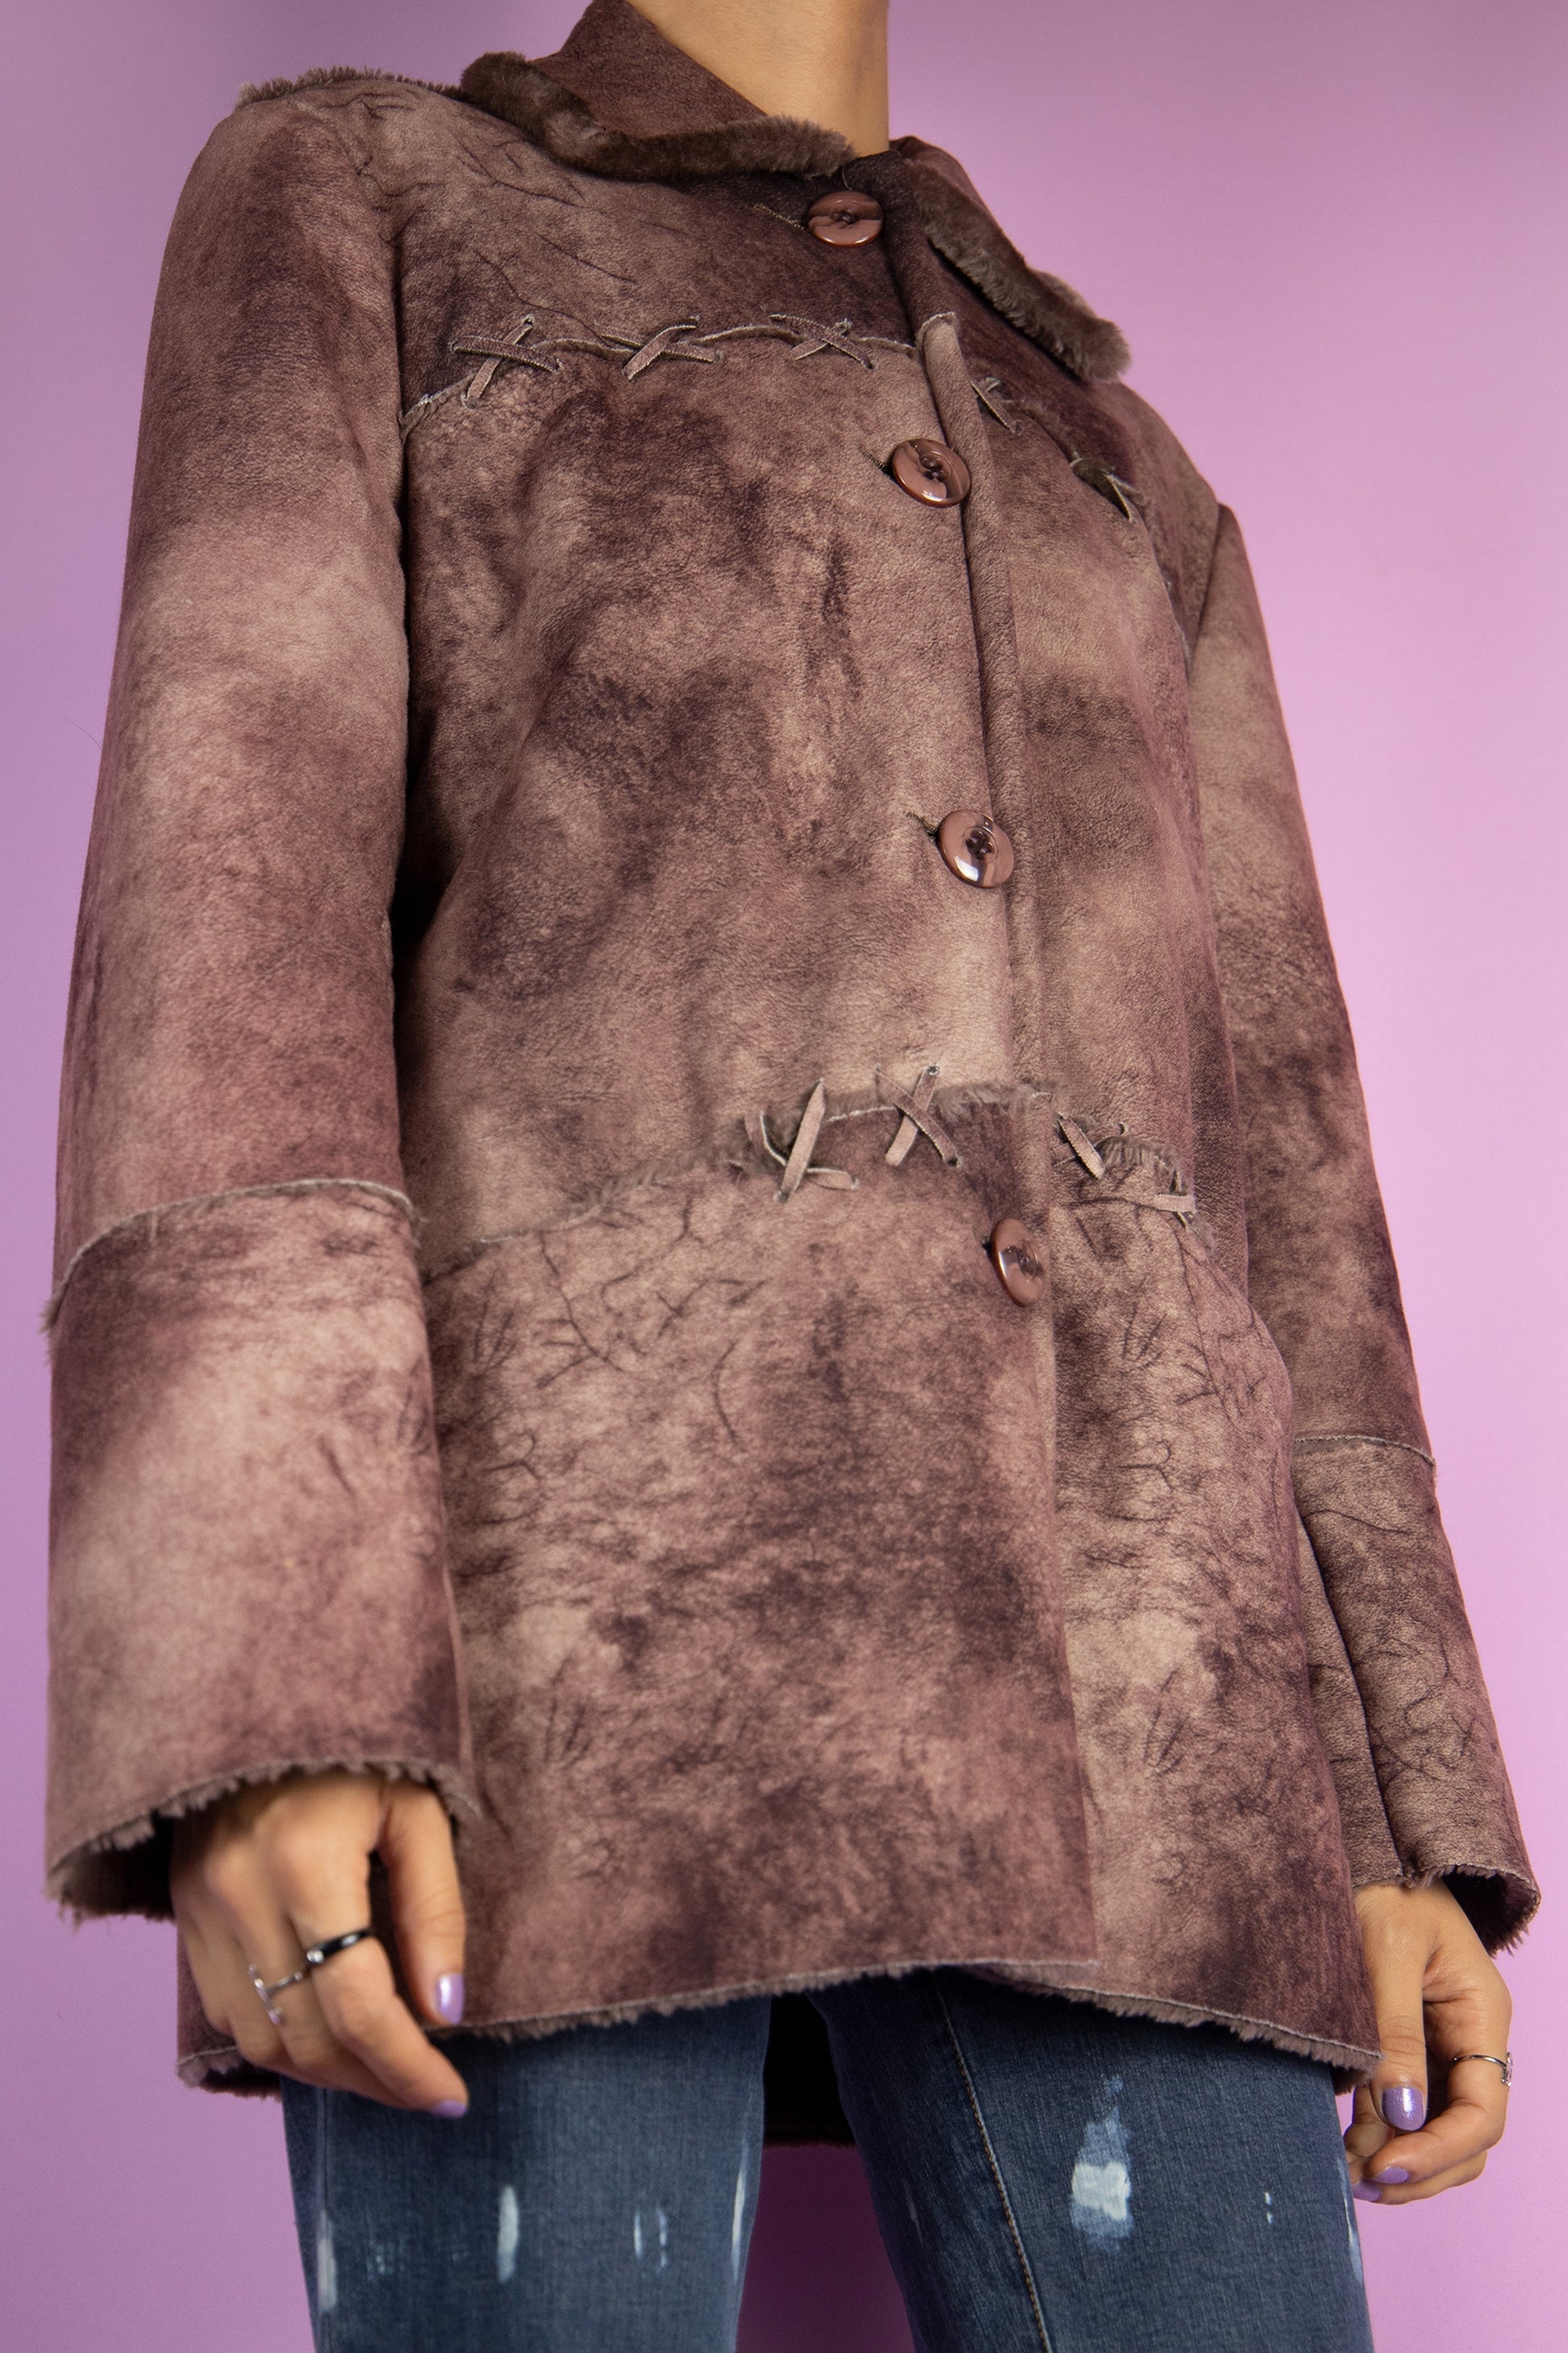 The Y2K Printed Faux Fur Jacket is a vintage 2000s winter brown abstract tie-dye pattern statement coat with a collar, pockets, and buttons.